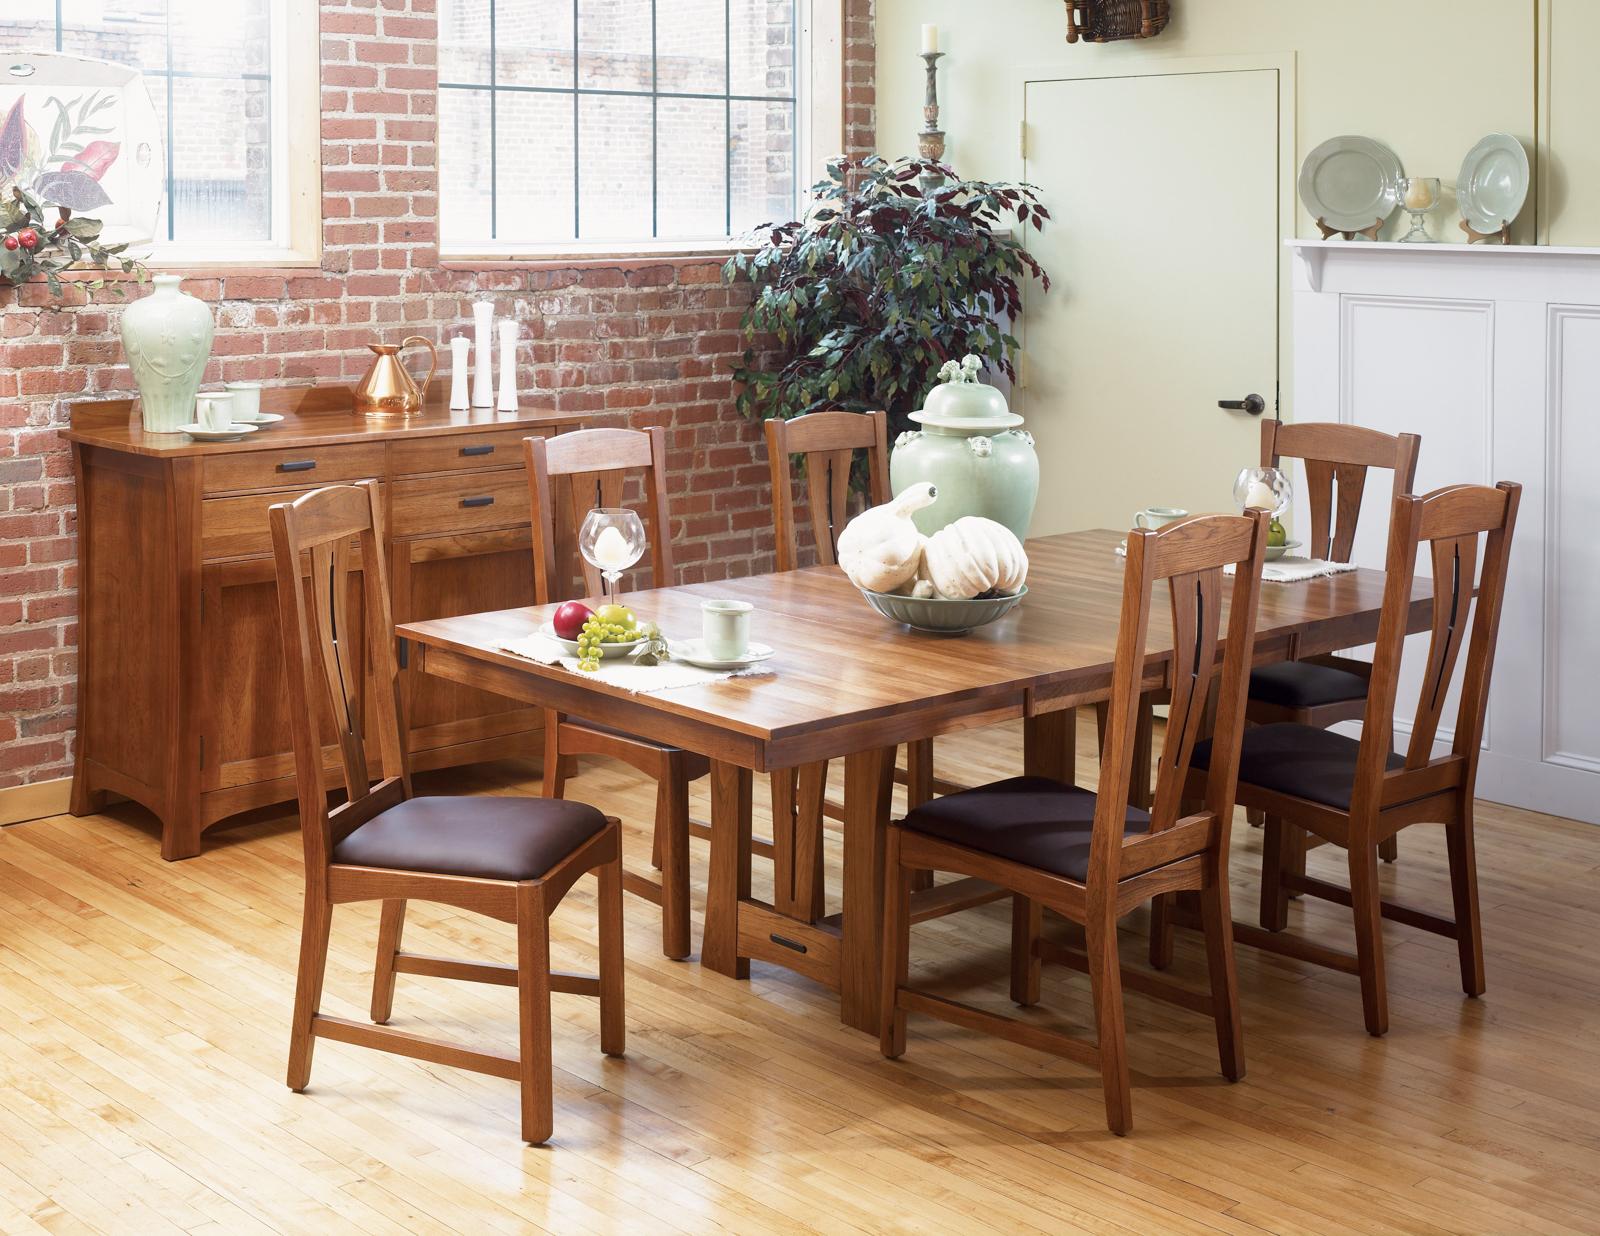 Rustic Dining Table Set Cattail Bungalow CATAM6300-Set-8 in Amber Top grain leather